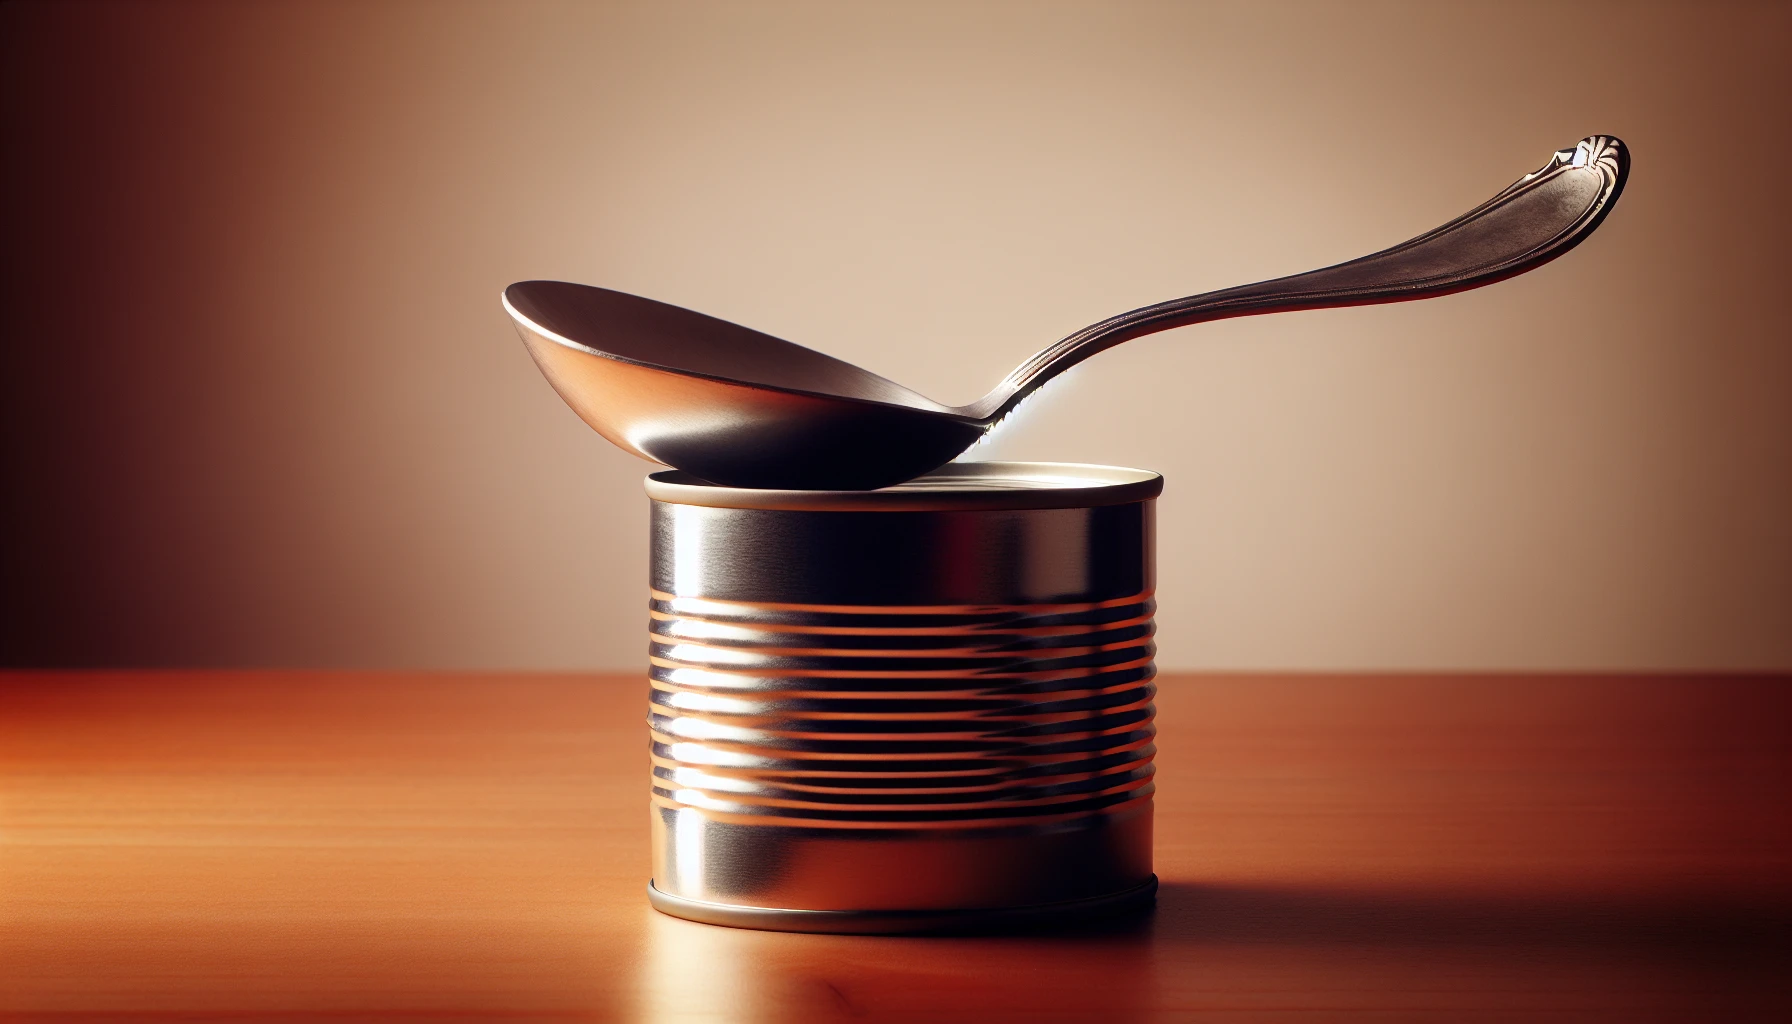 Metal spoon and can lid